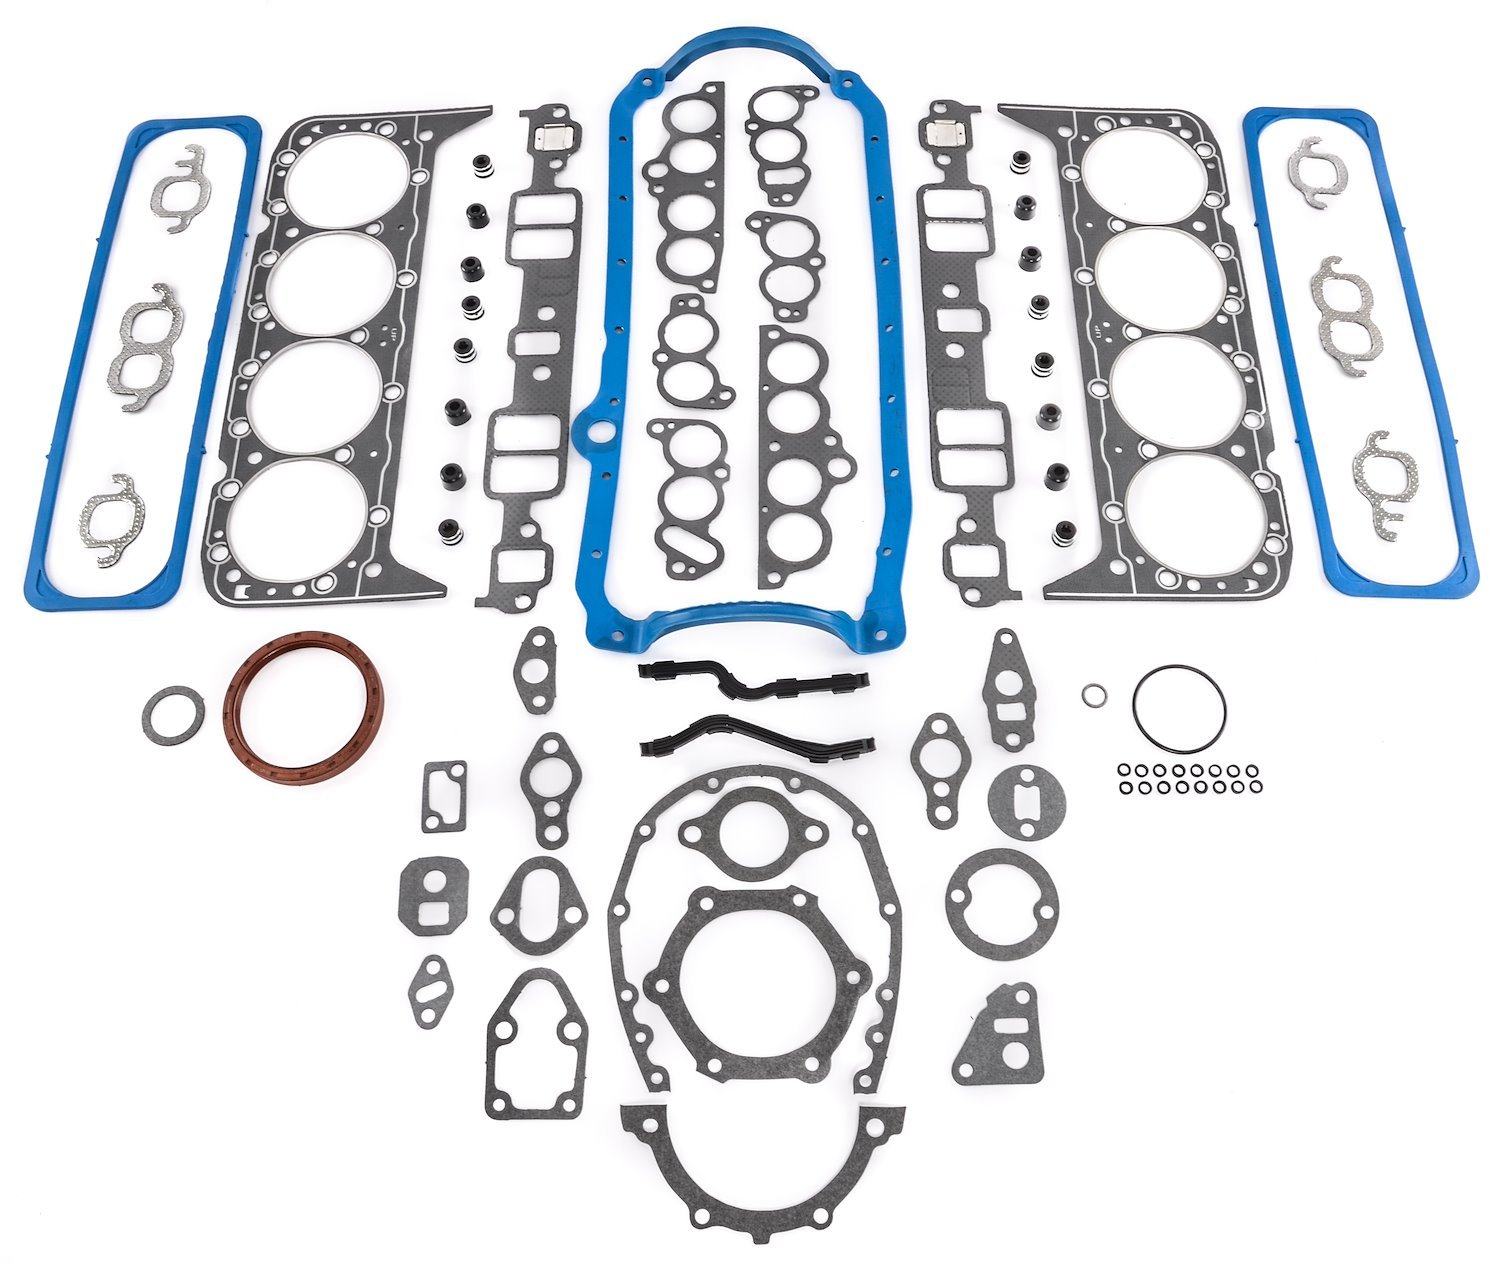 Engine Gasket Kit for 1987-1995 Small Block Chevy